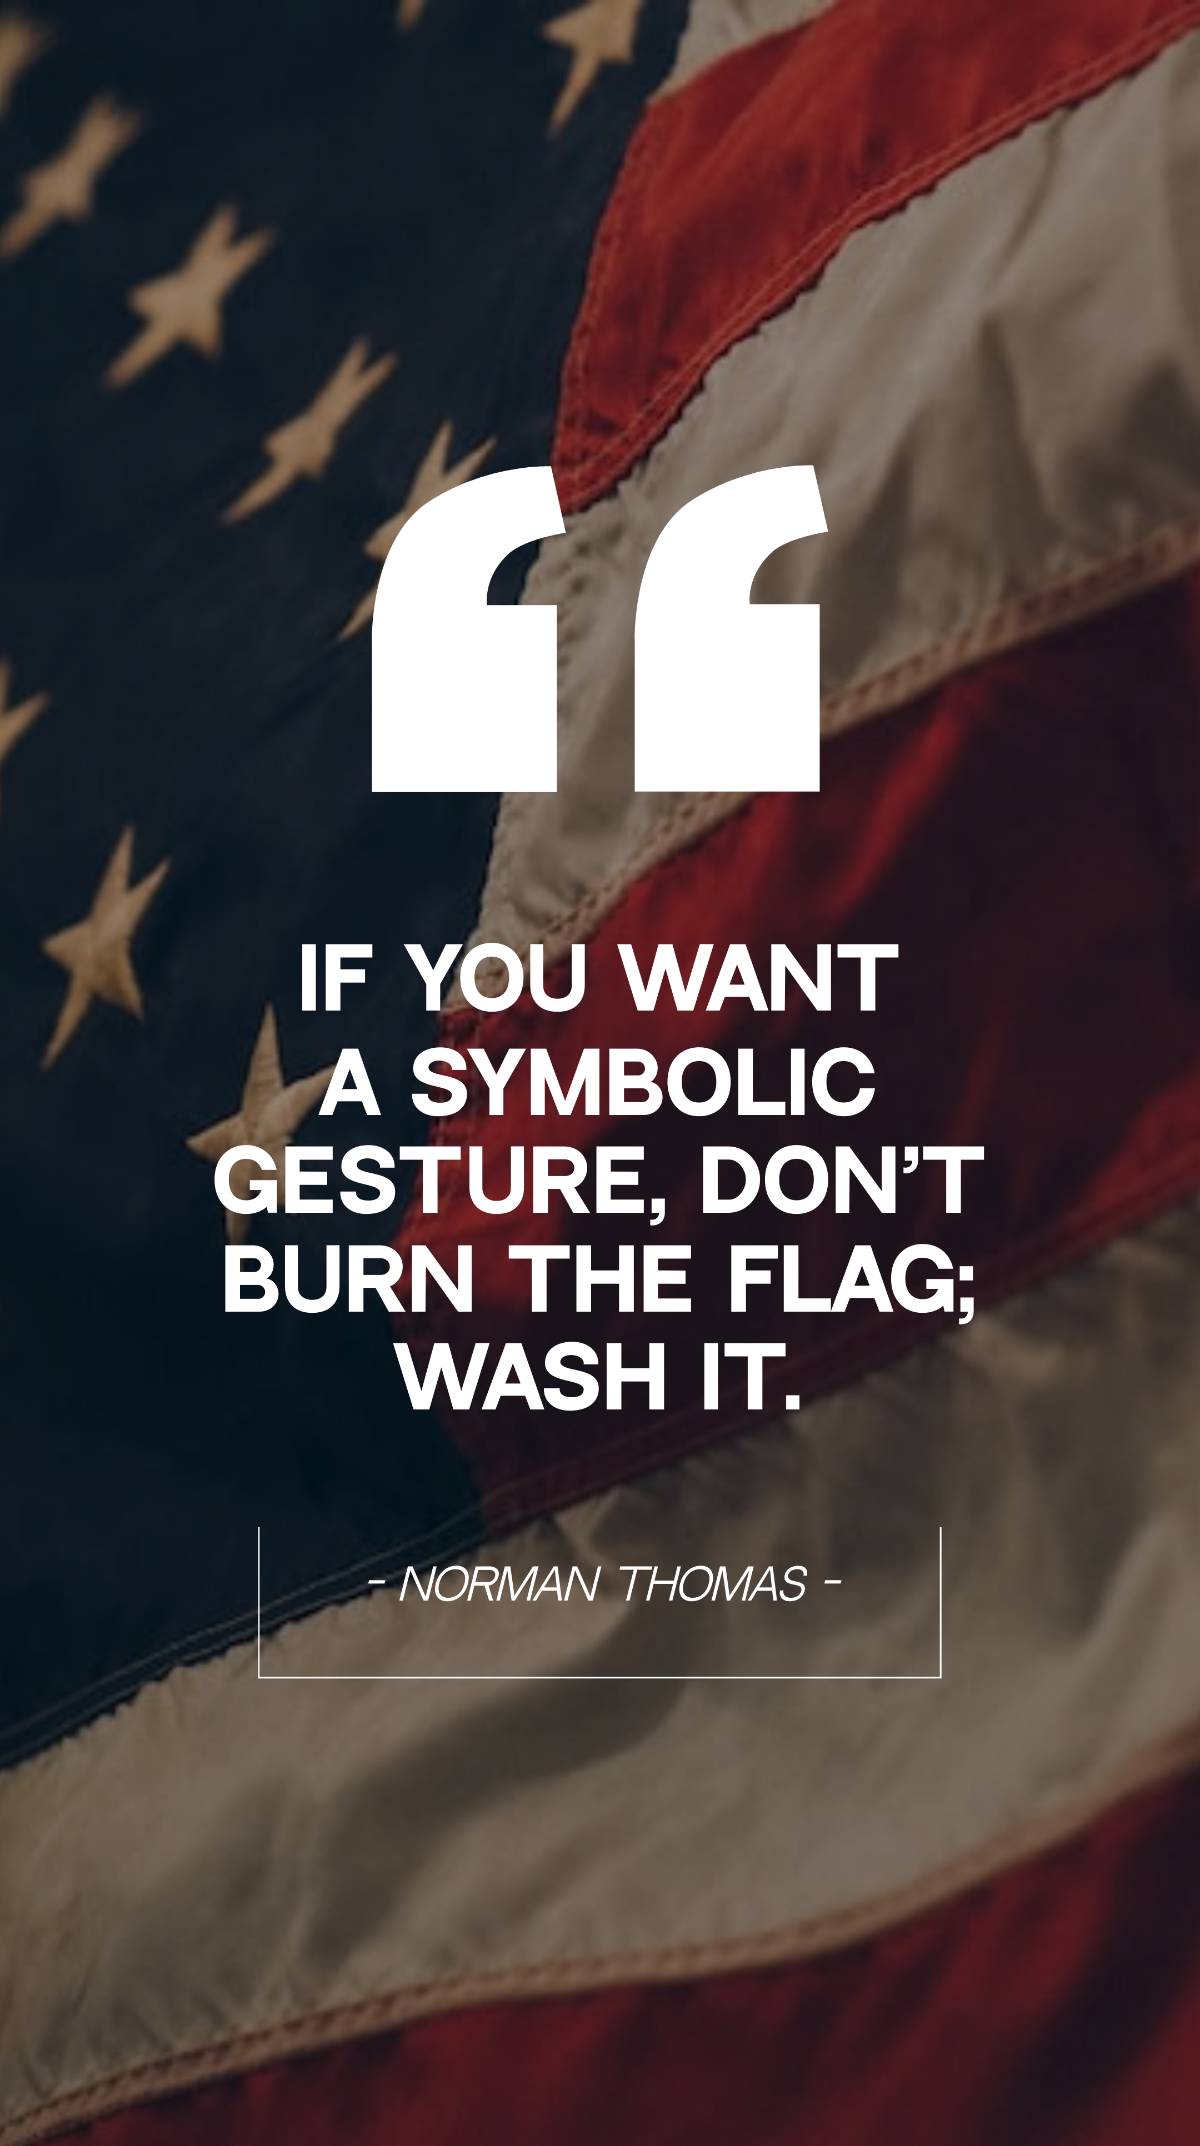 Free Norman Thomas - If you want a symbolic gesture, don’t burn the flag; wash it. Template